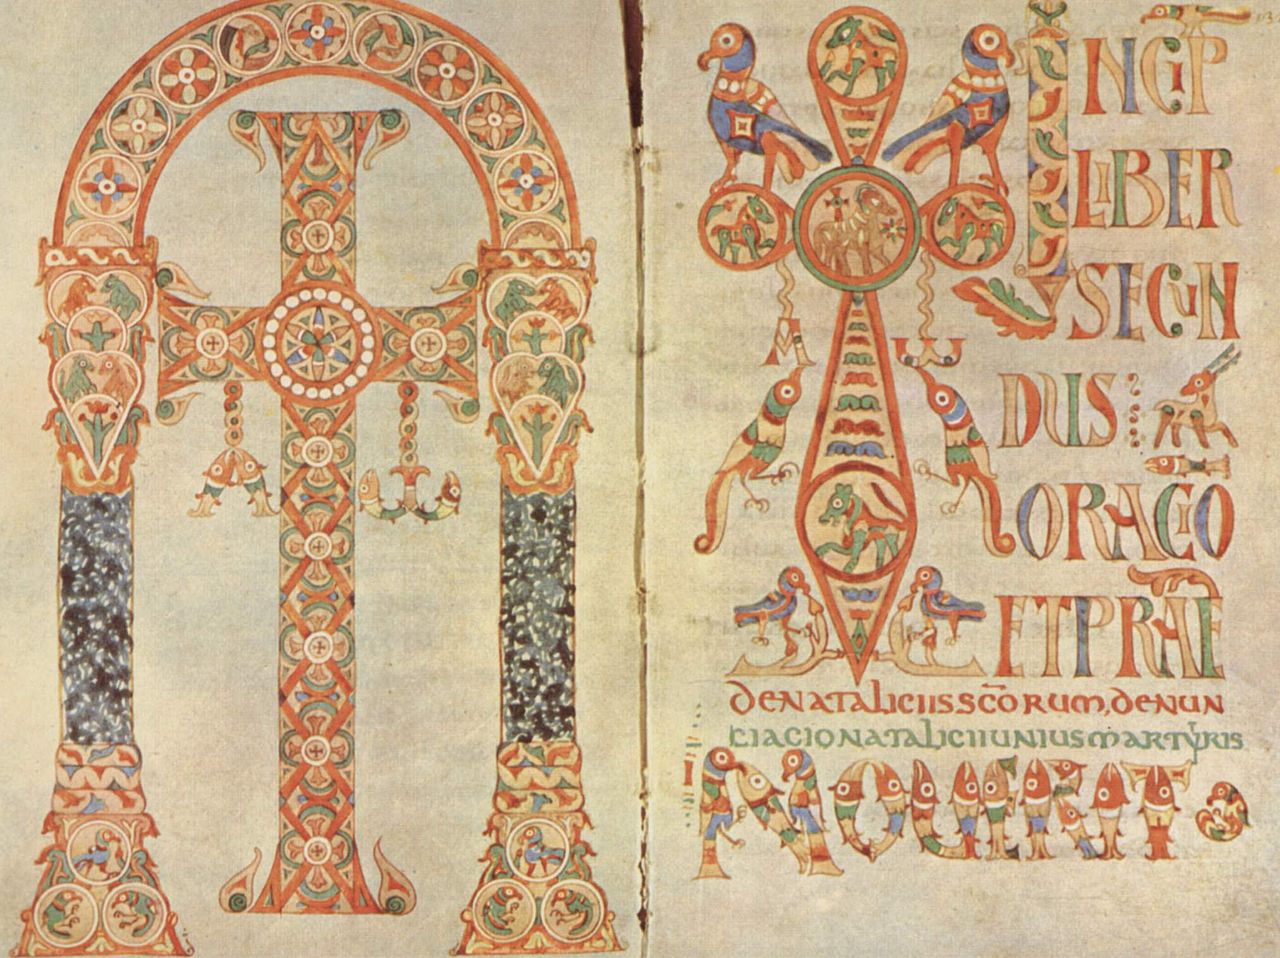 8th Century Gelasian Sacramentary Frontpiece. The oldest surviving manuscript in Western Europe, from Merovingian Francia.jpg